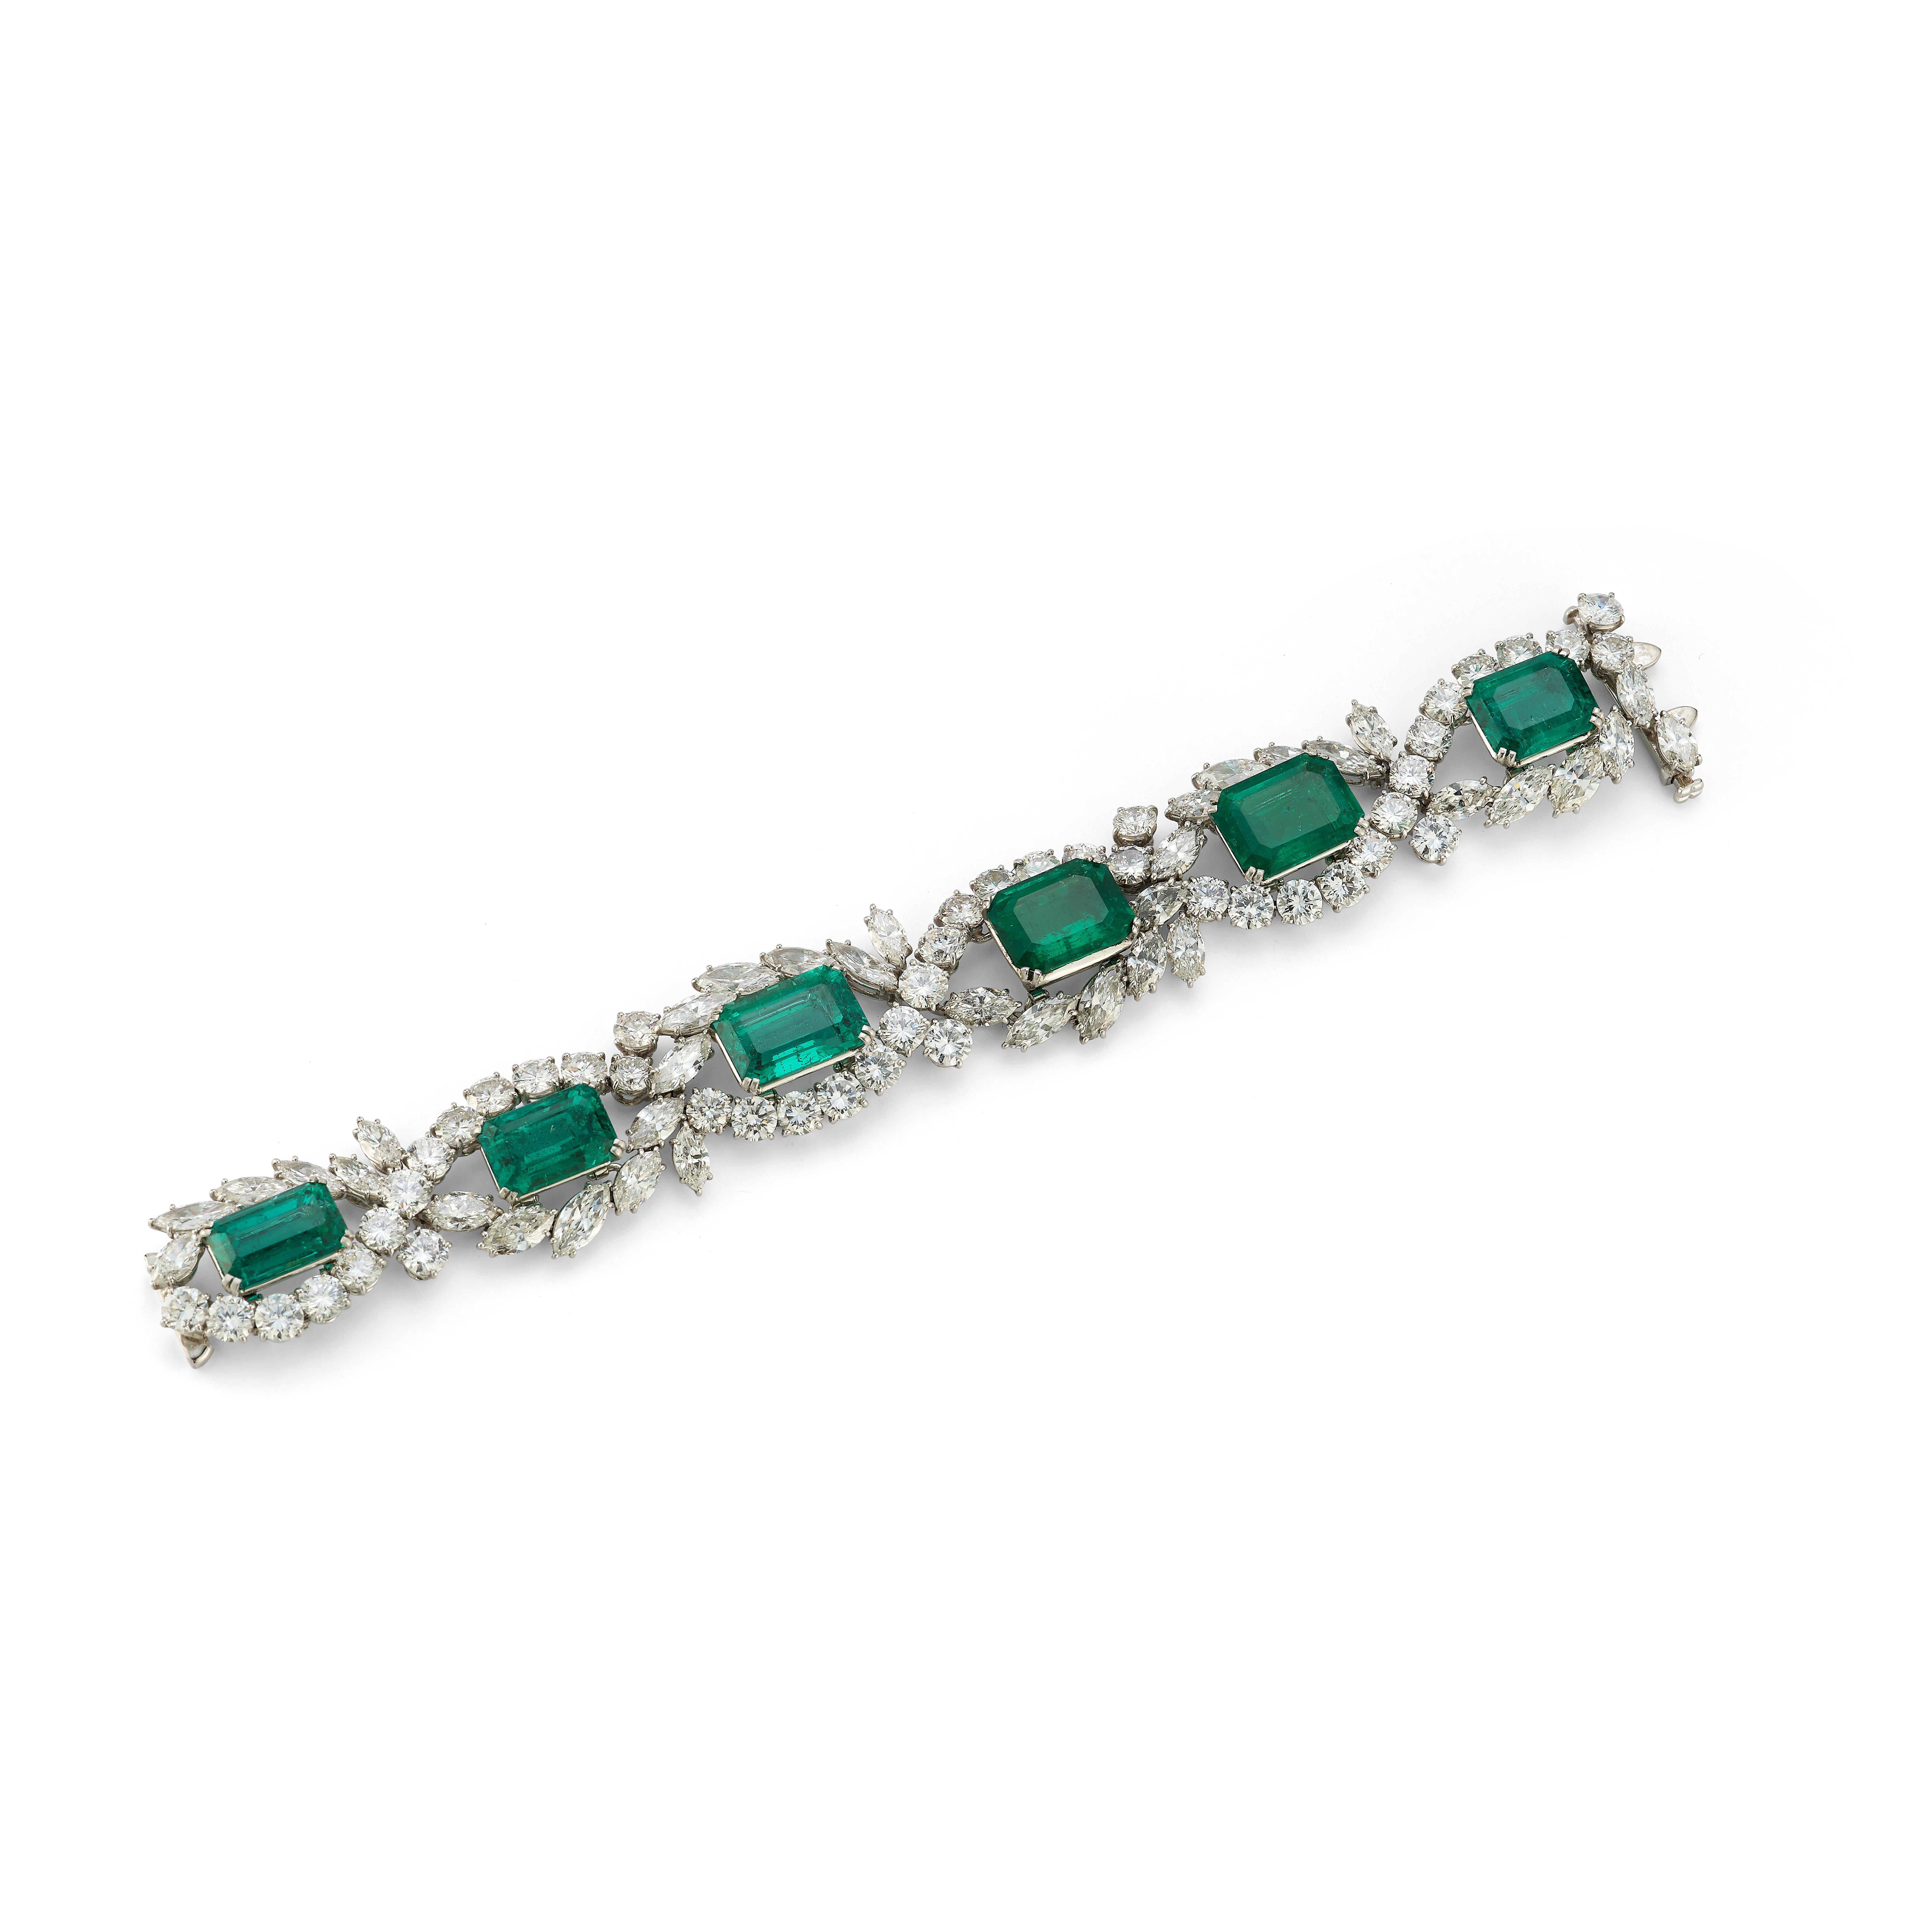 Harry Winston Emerald & Diamond Bracelet. 

Set with a row of six emerald-cut emeralds weighing 39.39 carats, to the open-work frame of diamond clusters with round brilliant-cut diamonds and marquise-shaped diamonds, mounted in